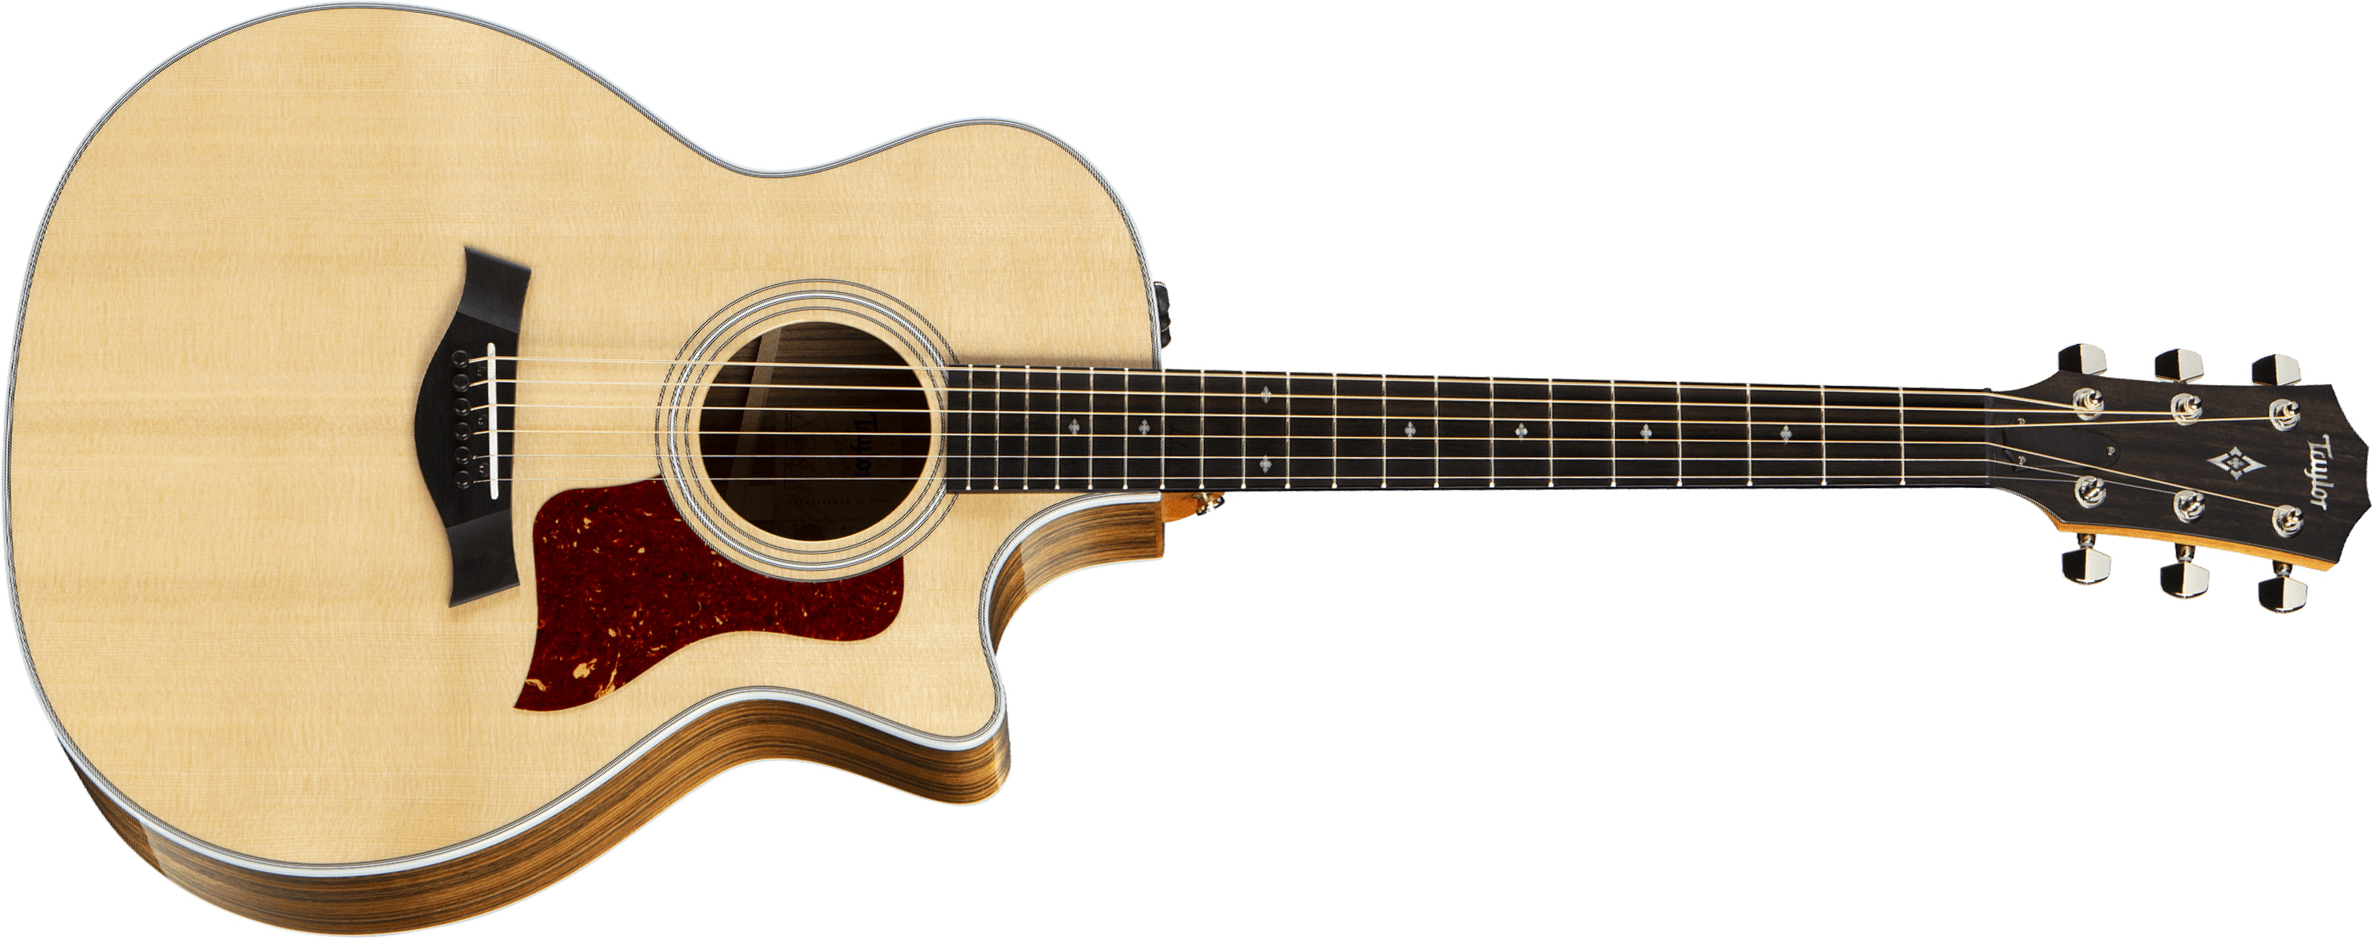 Taylor 414ce V-class 2019 Grand Auditorium Cw Epicea Ovangkol Eb Es2 - Natural - Electro acoustic guitar - Main picture